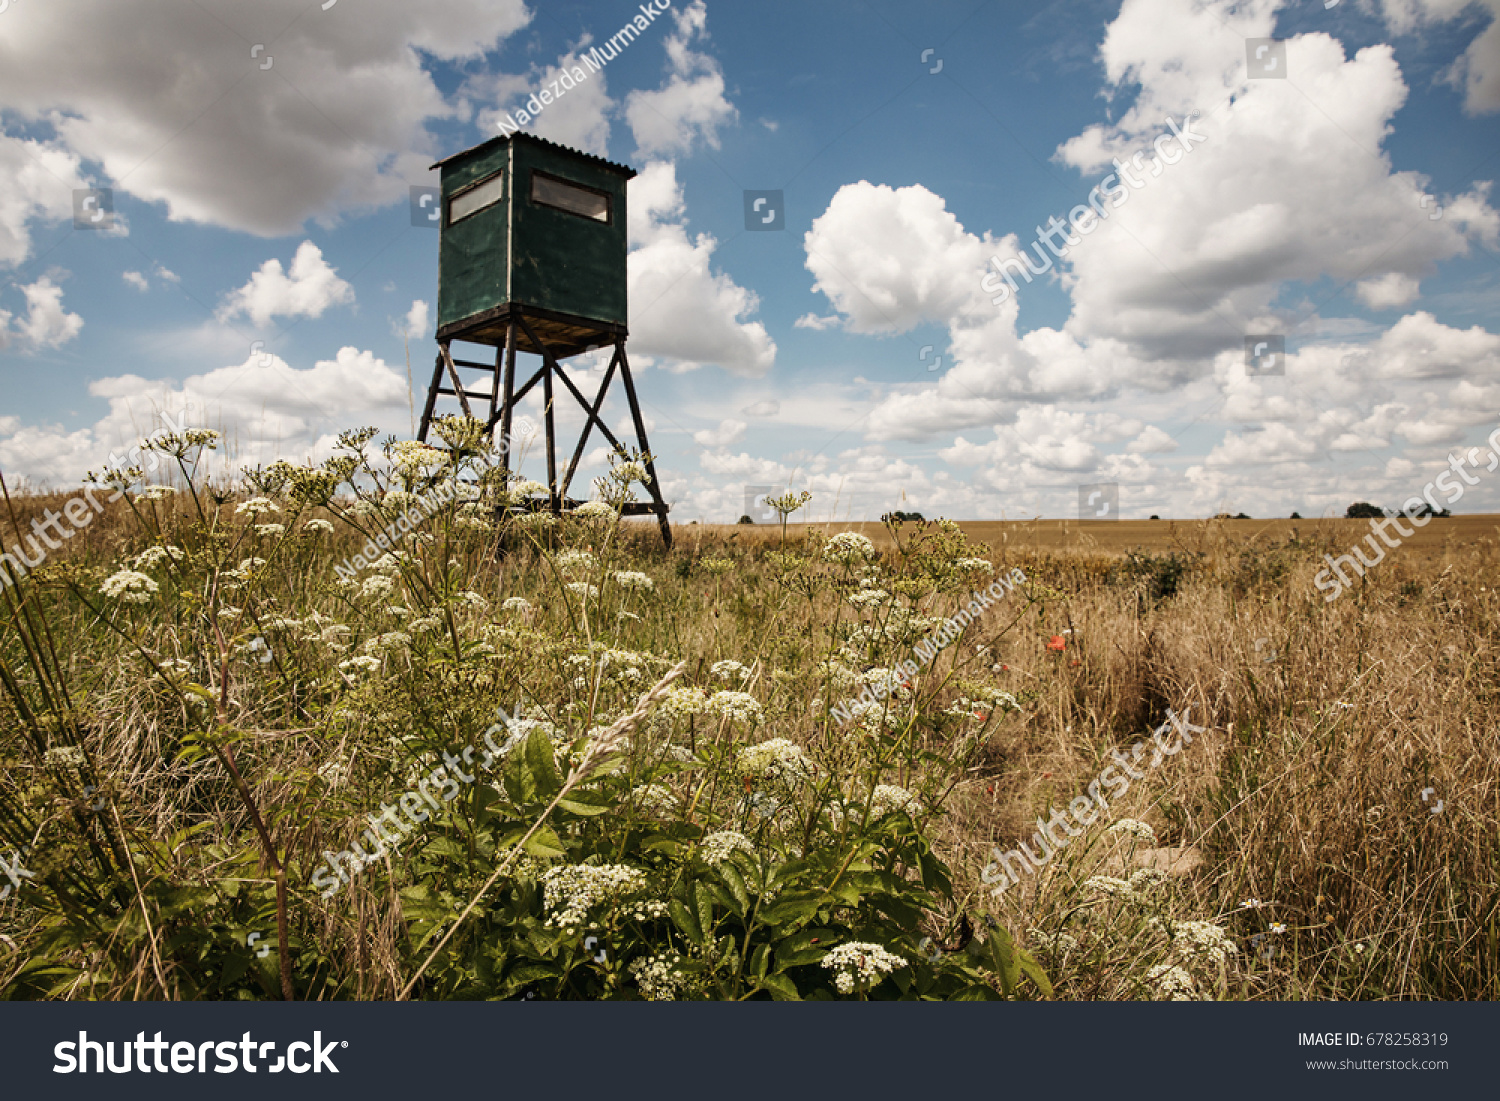 Animal watching tower on field. Sky with clouds. #678258319